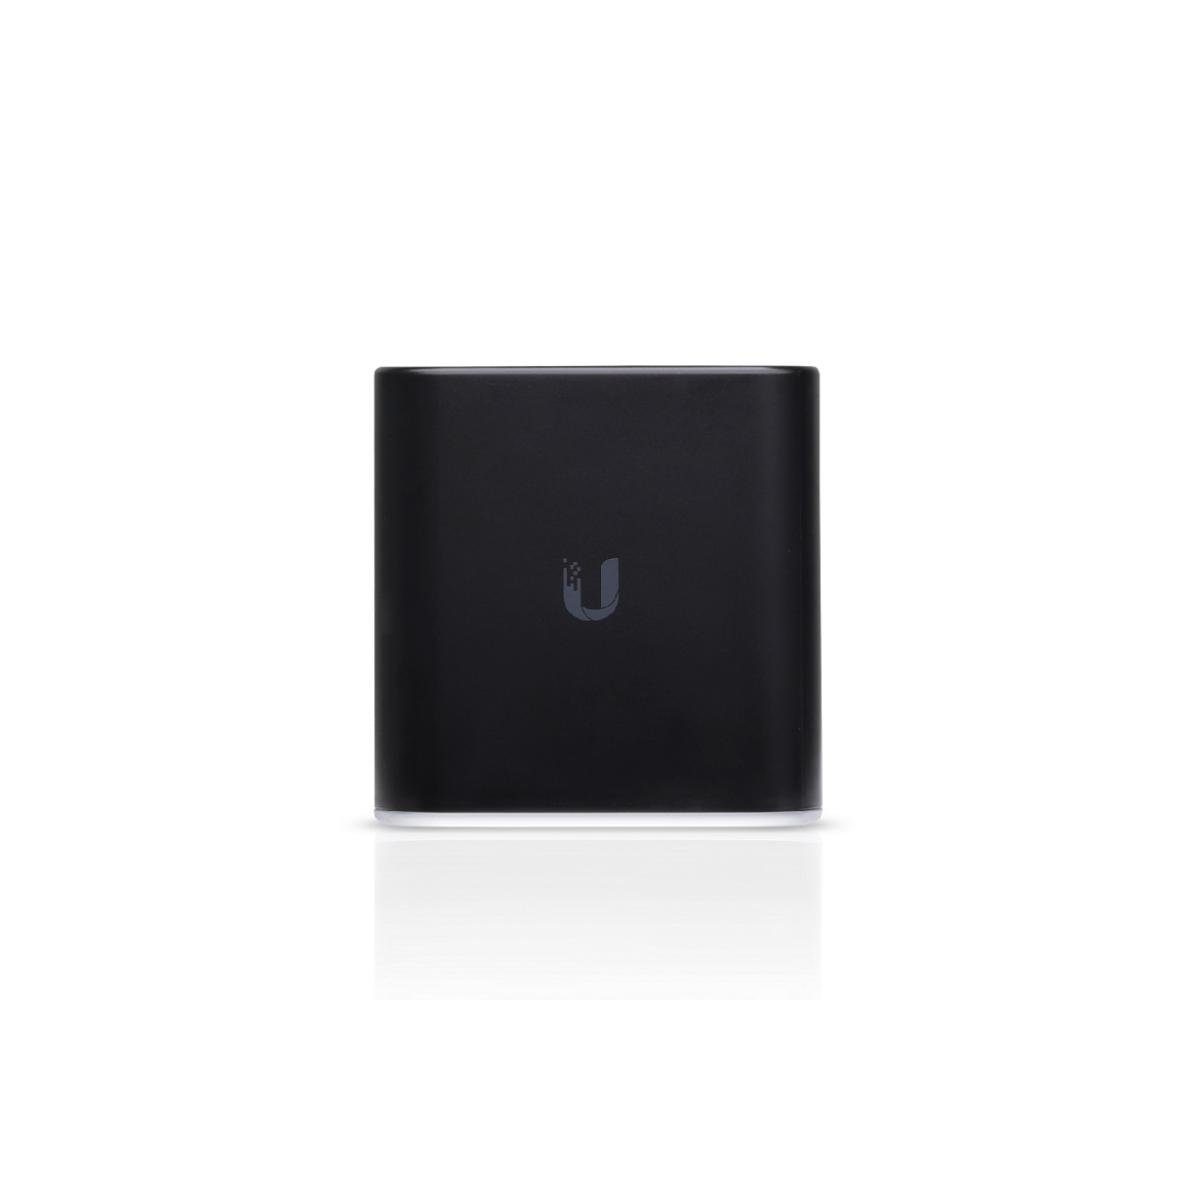 Networks Heim Access WLAN ACB-ISP AirCube Point WLAN-Access - Ubiquiti Point